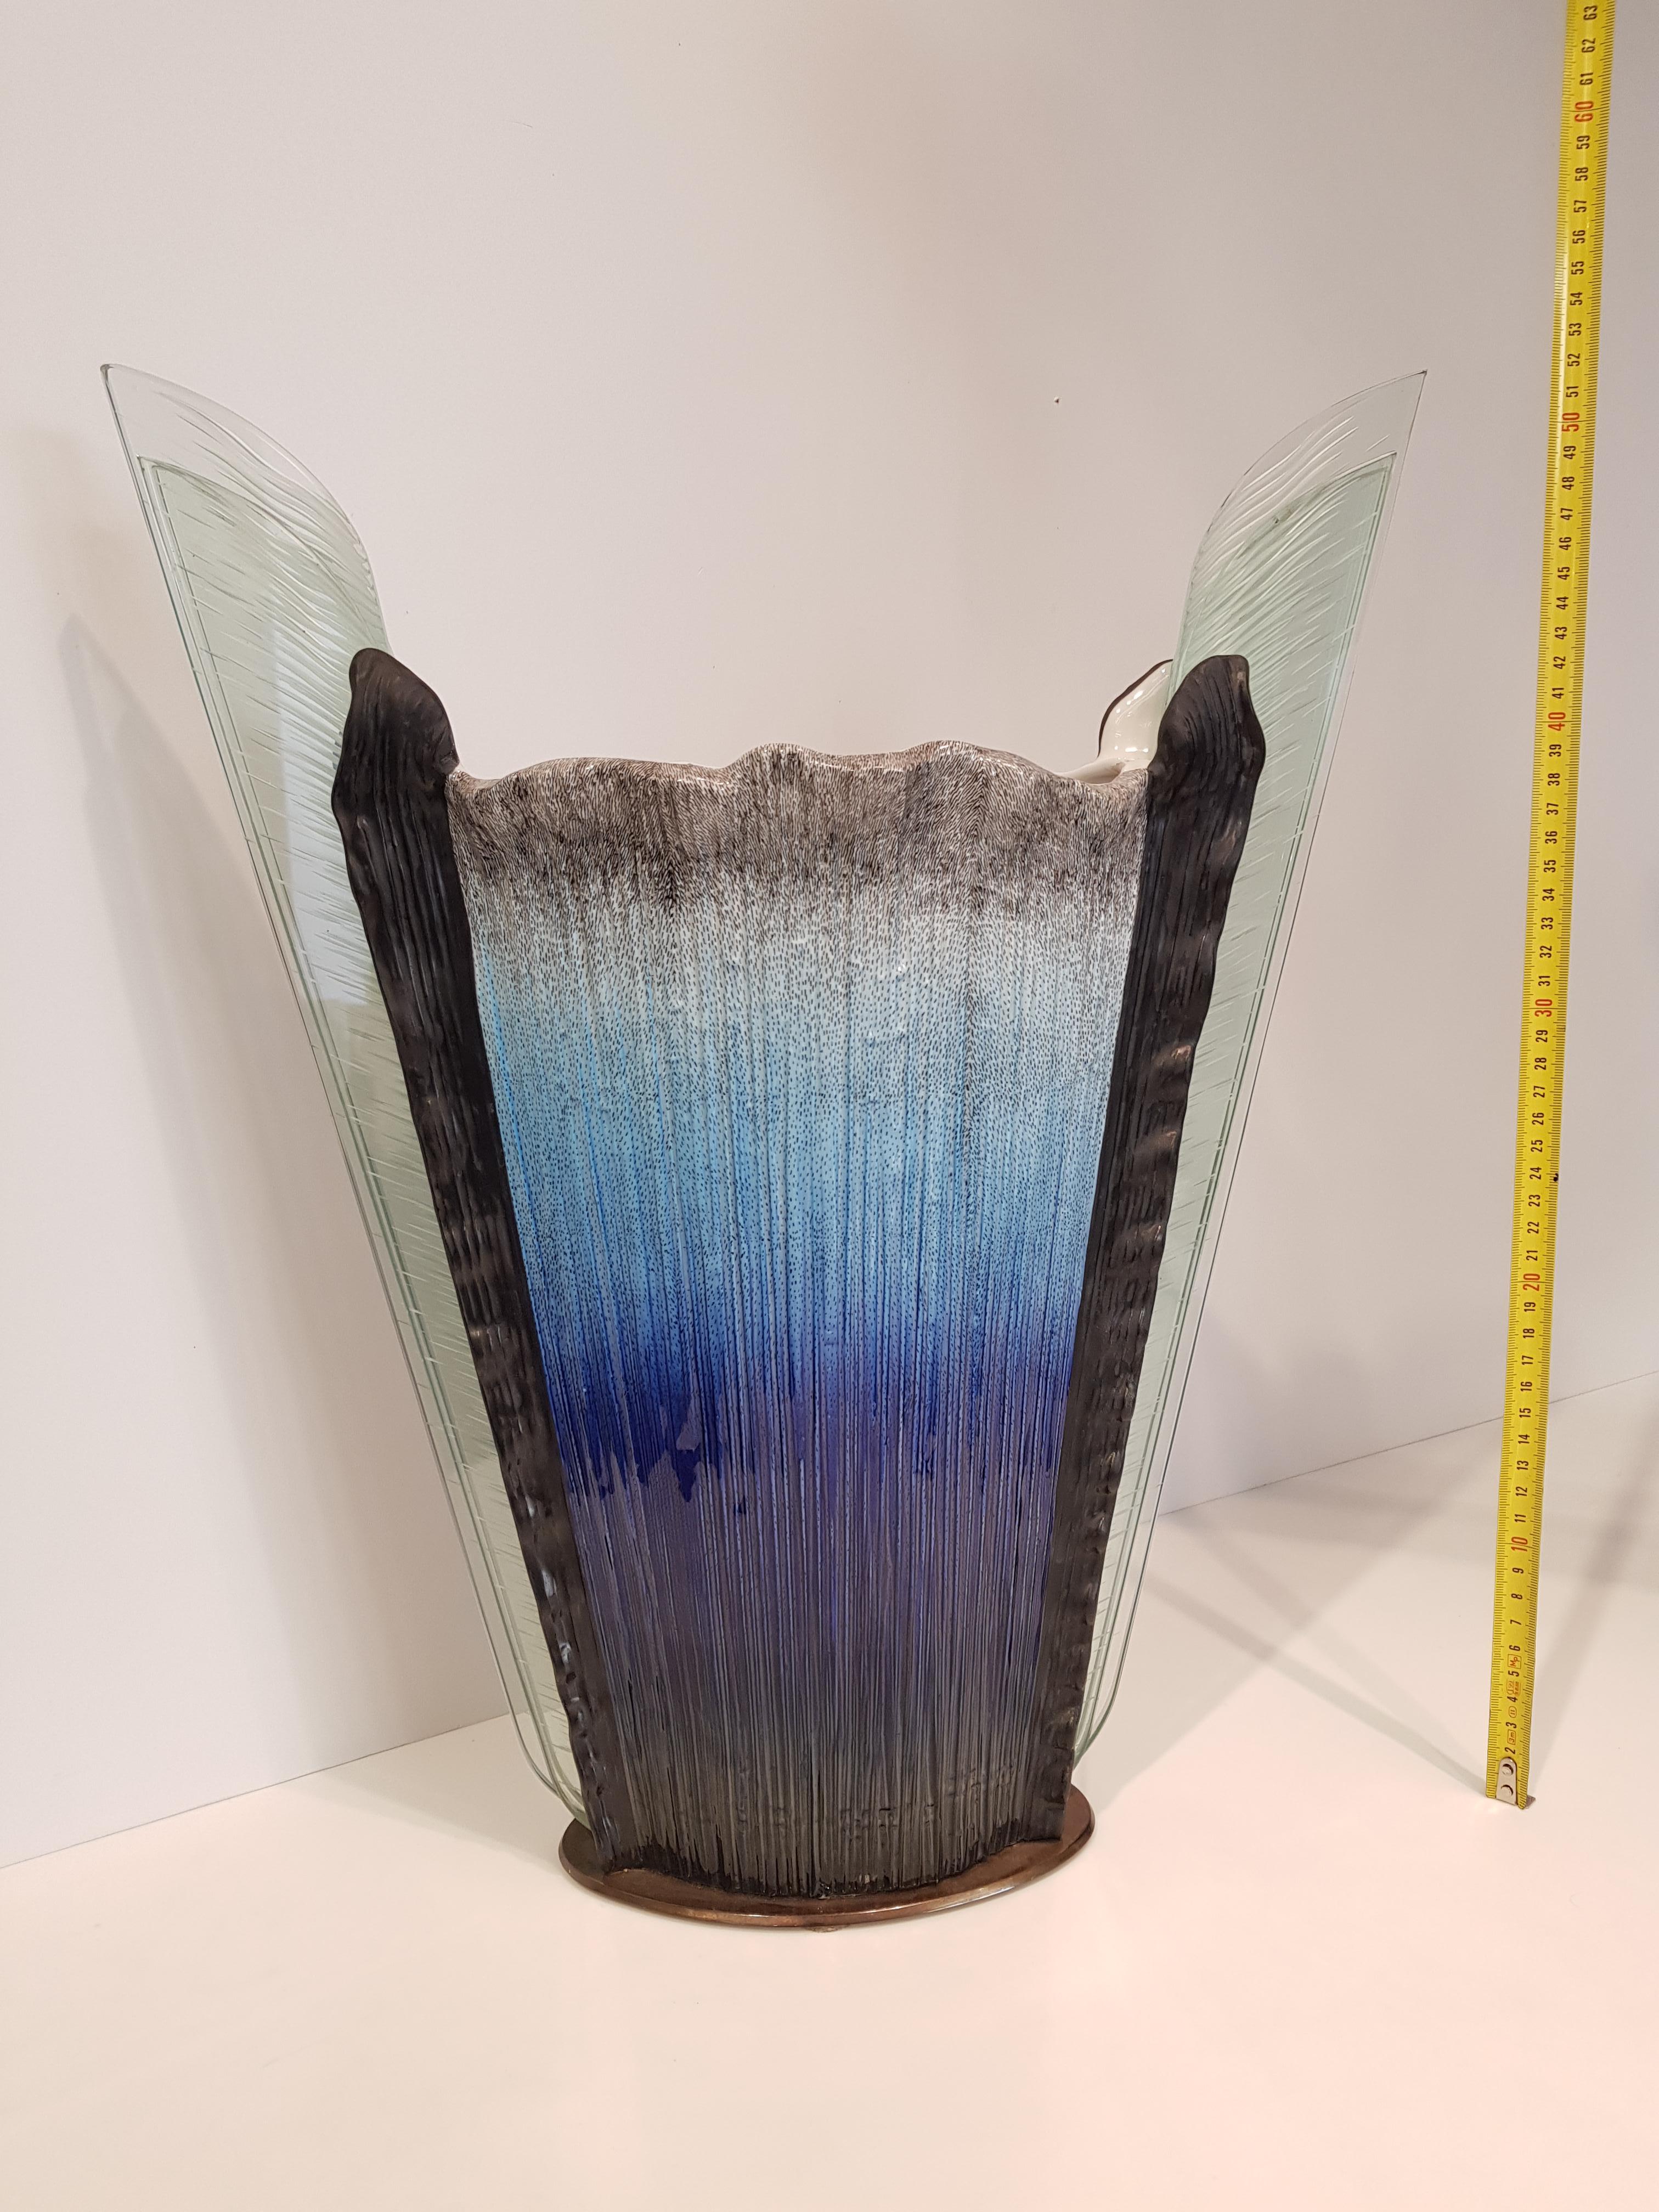 Vase made in the 1990s by the fine Mangani manufacture in Florence with the particular design signed by Annibale Oste.
Porcelain worked and decorated by hand with intense colors, they join the lightness of the glass creating a unique and